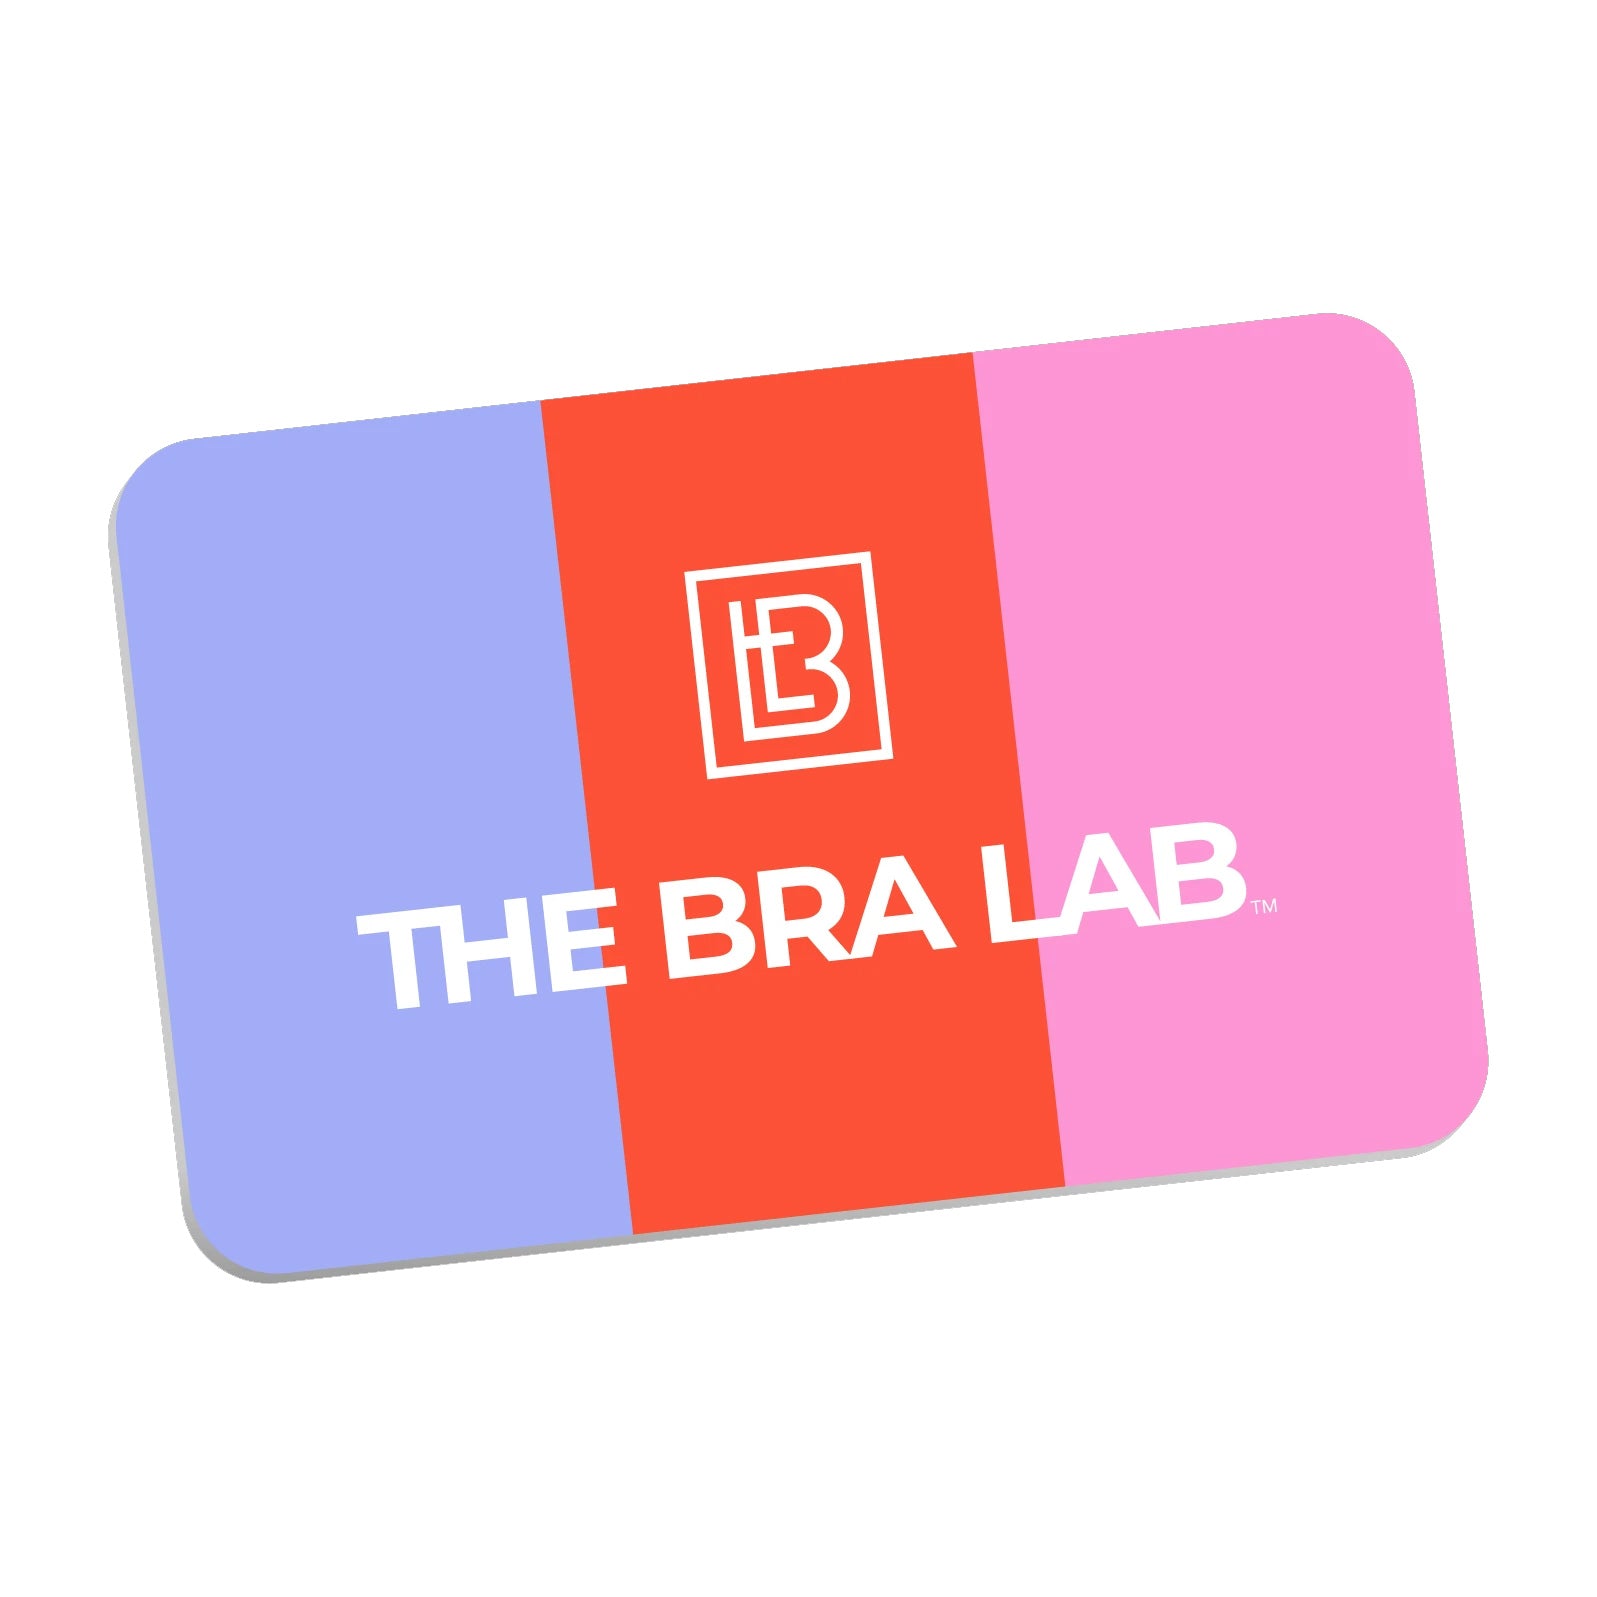 Gift Card – Transparent Labs